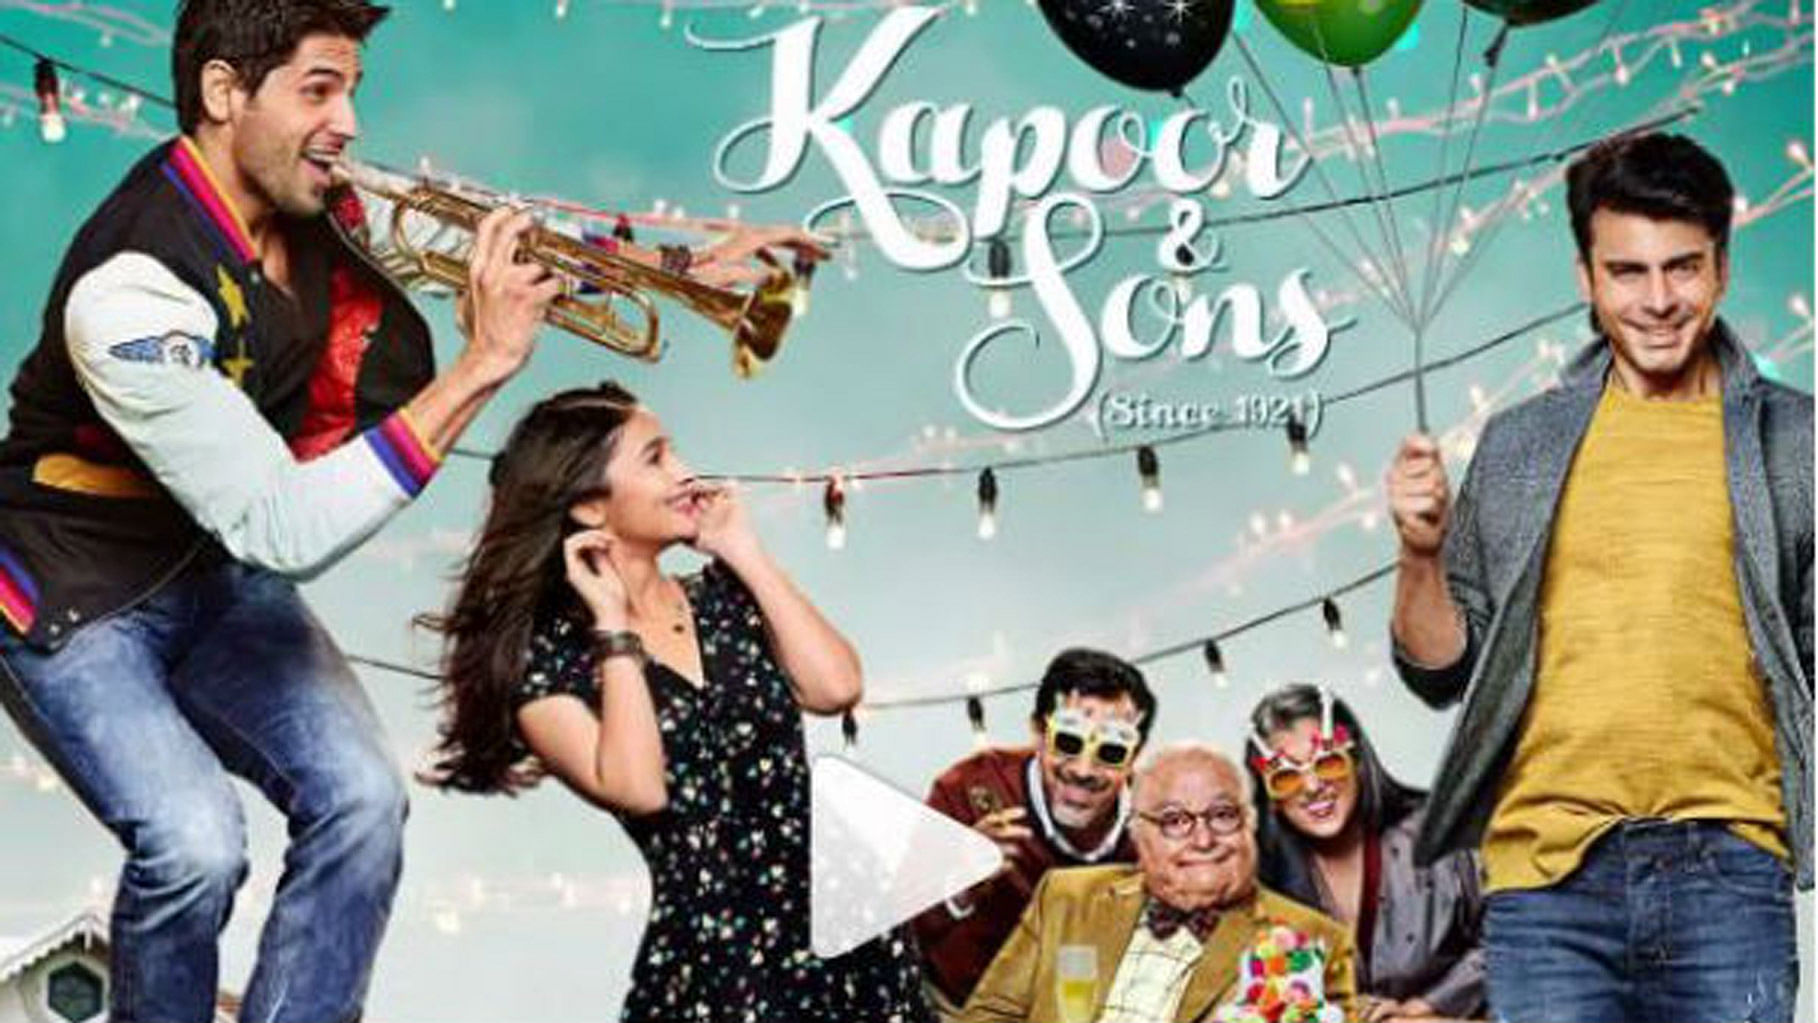 A poster from the film, <i>Kapoor &amp; Sons</i>. (Photo: Kapoor &amp; Sons poster)